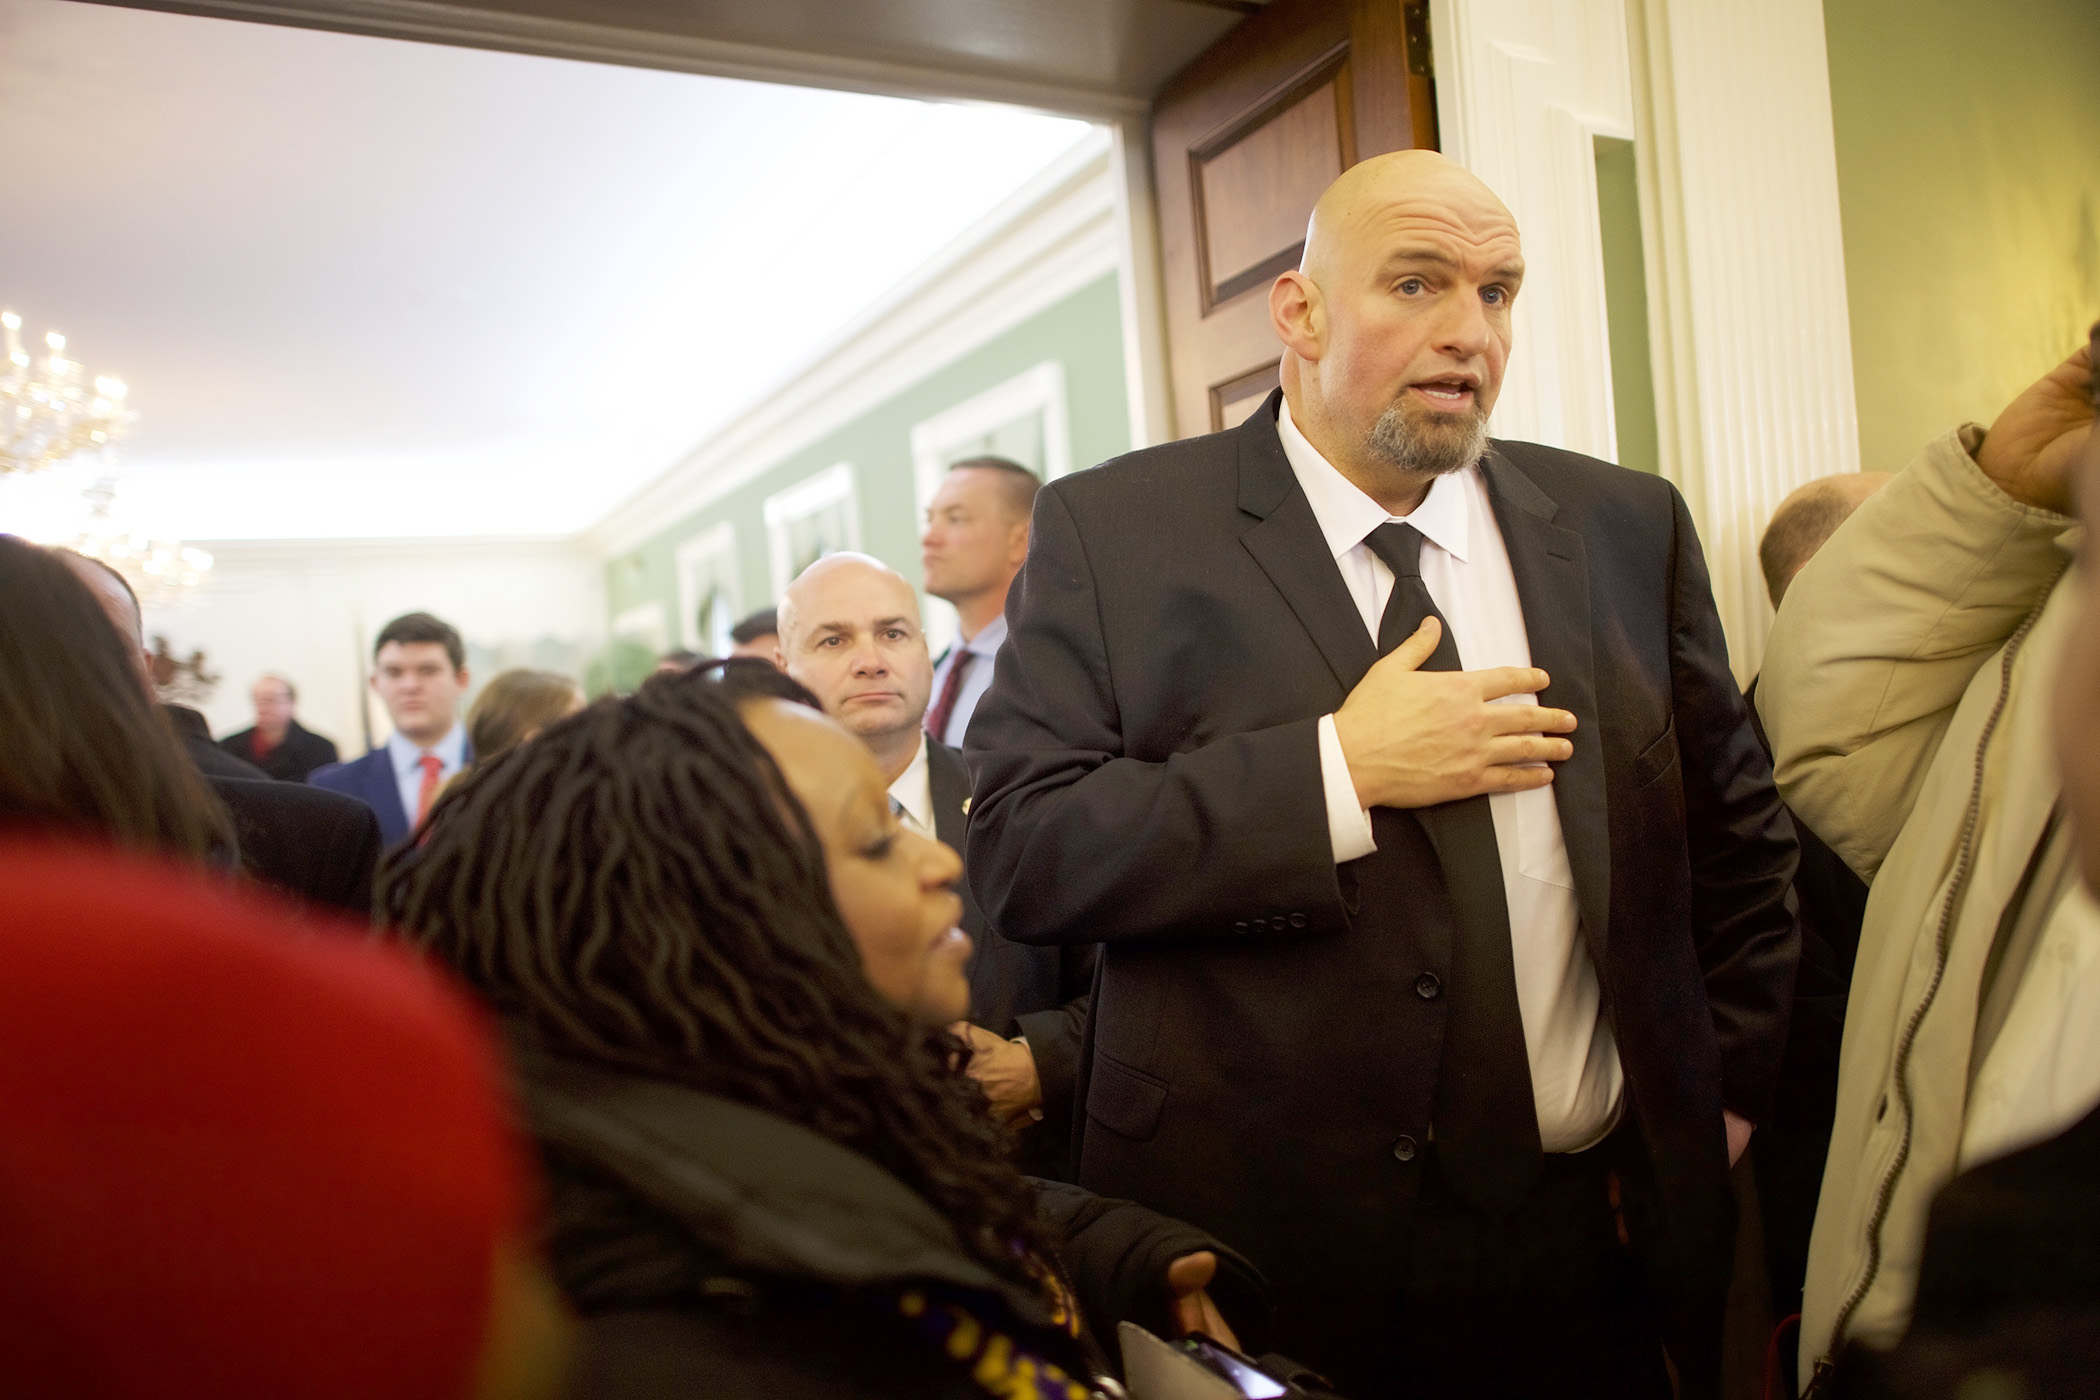 PHOTO: Lieutenant Governor John Fetterman speaks with supporters during an open house event at the residence of Governor Tom Wolf in Harrisburg, Penn., Jan. 15, 2019.